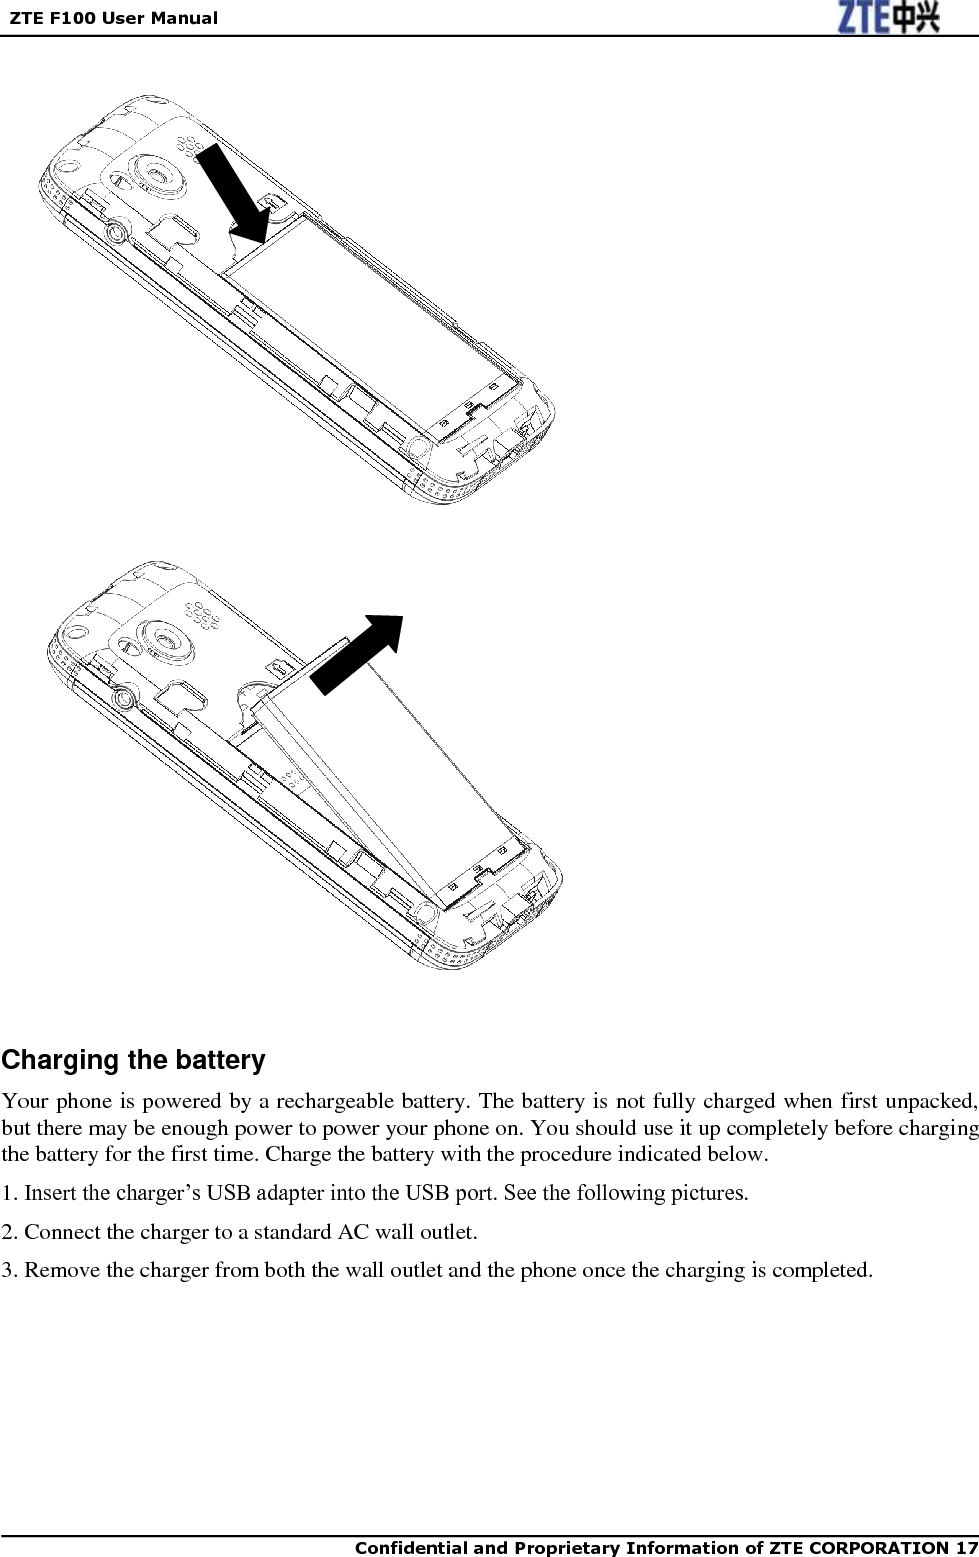   ZTE F100 User Manual    Confidential and Proprietary Information of ZTE CORPORATION 17                            Charging the battery Your phone is powered by a rechargeable battery. The battery is not fully charged when first unpacked, but there may be enough power to power your phone on. You should use it up completely before charging the battery for the first time. Charge the battery with the procedure indicated below. 1. Insert the charger‟s USB adapter into the USB port. See the following pictures. 2. Connect the charger to a standard AC wall outlet. 3. Remove the charger from both the wall outlet and the phone once the charging is completed.       